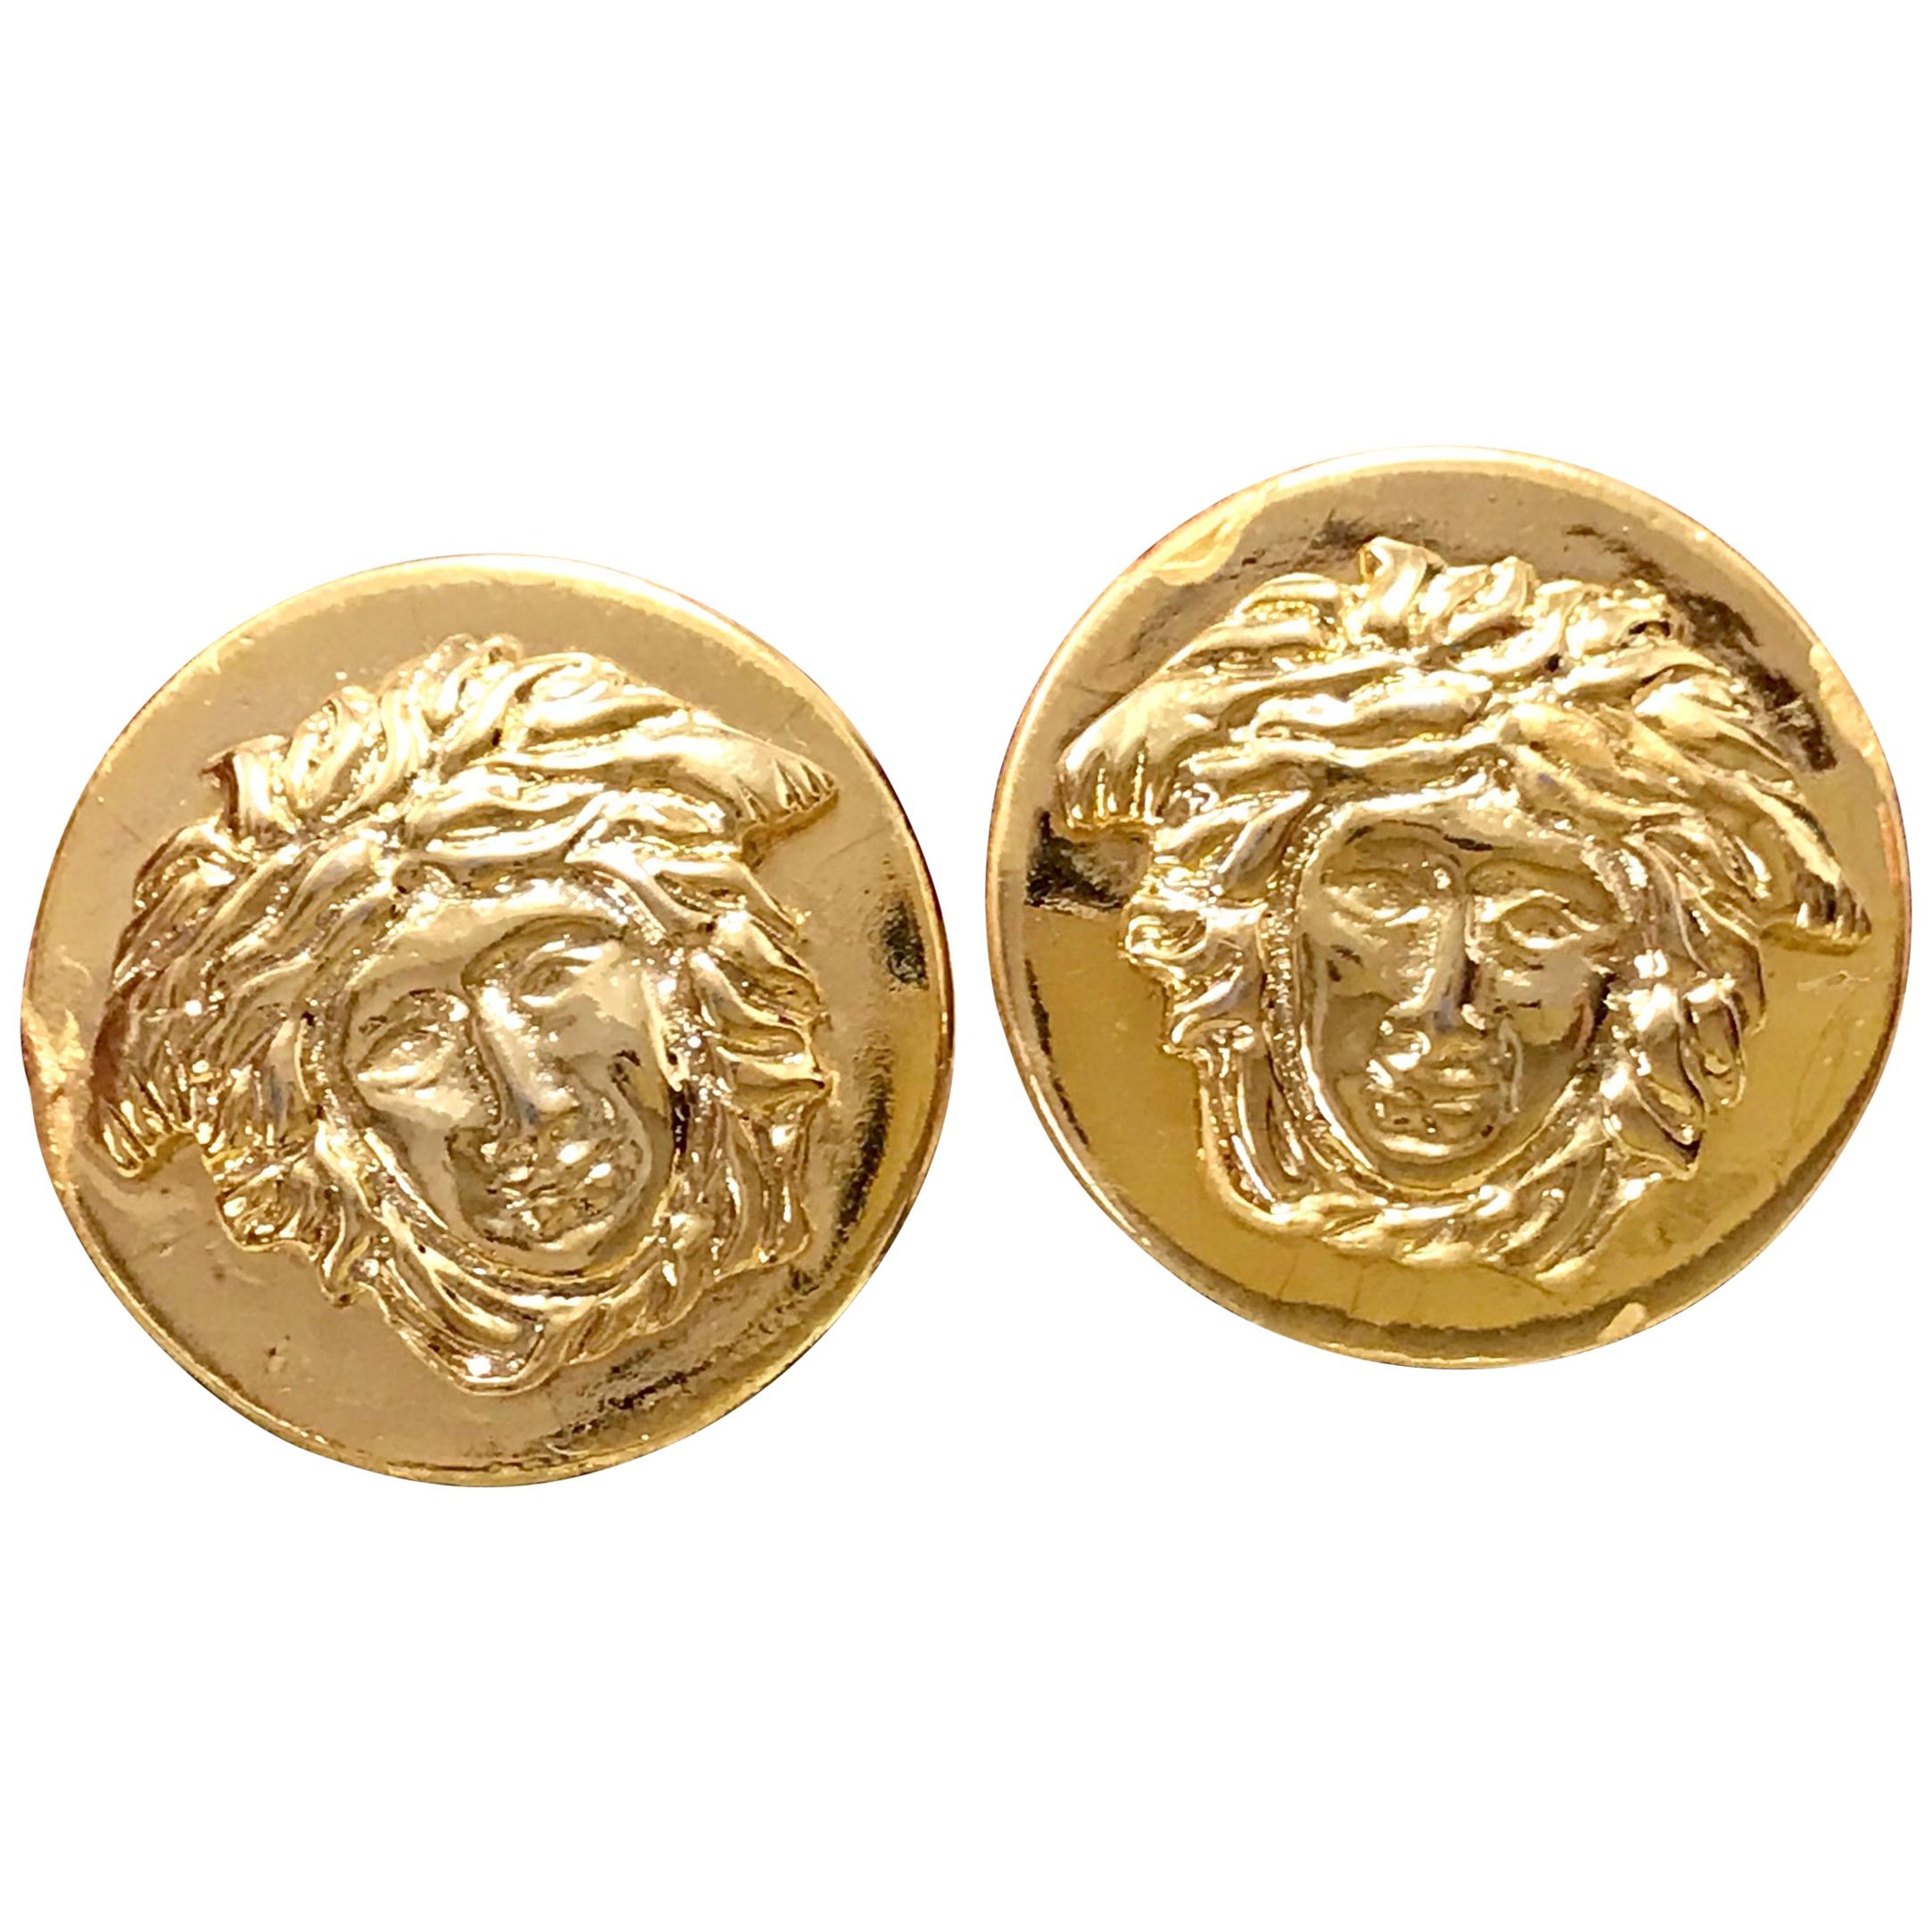 Vintage Gianni Versace golden round medusa motif earrings. Lady Gaga style. For Sale